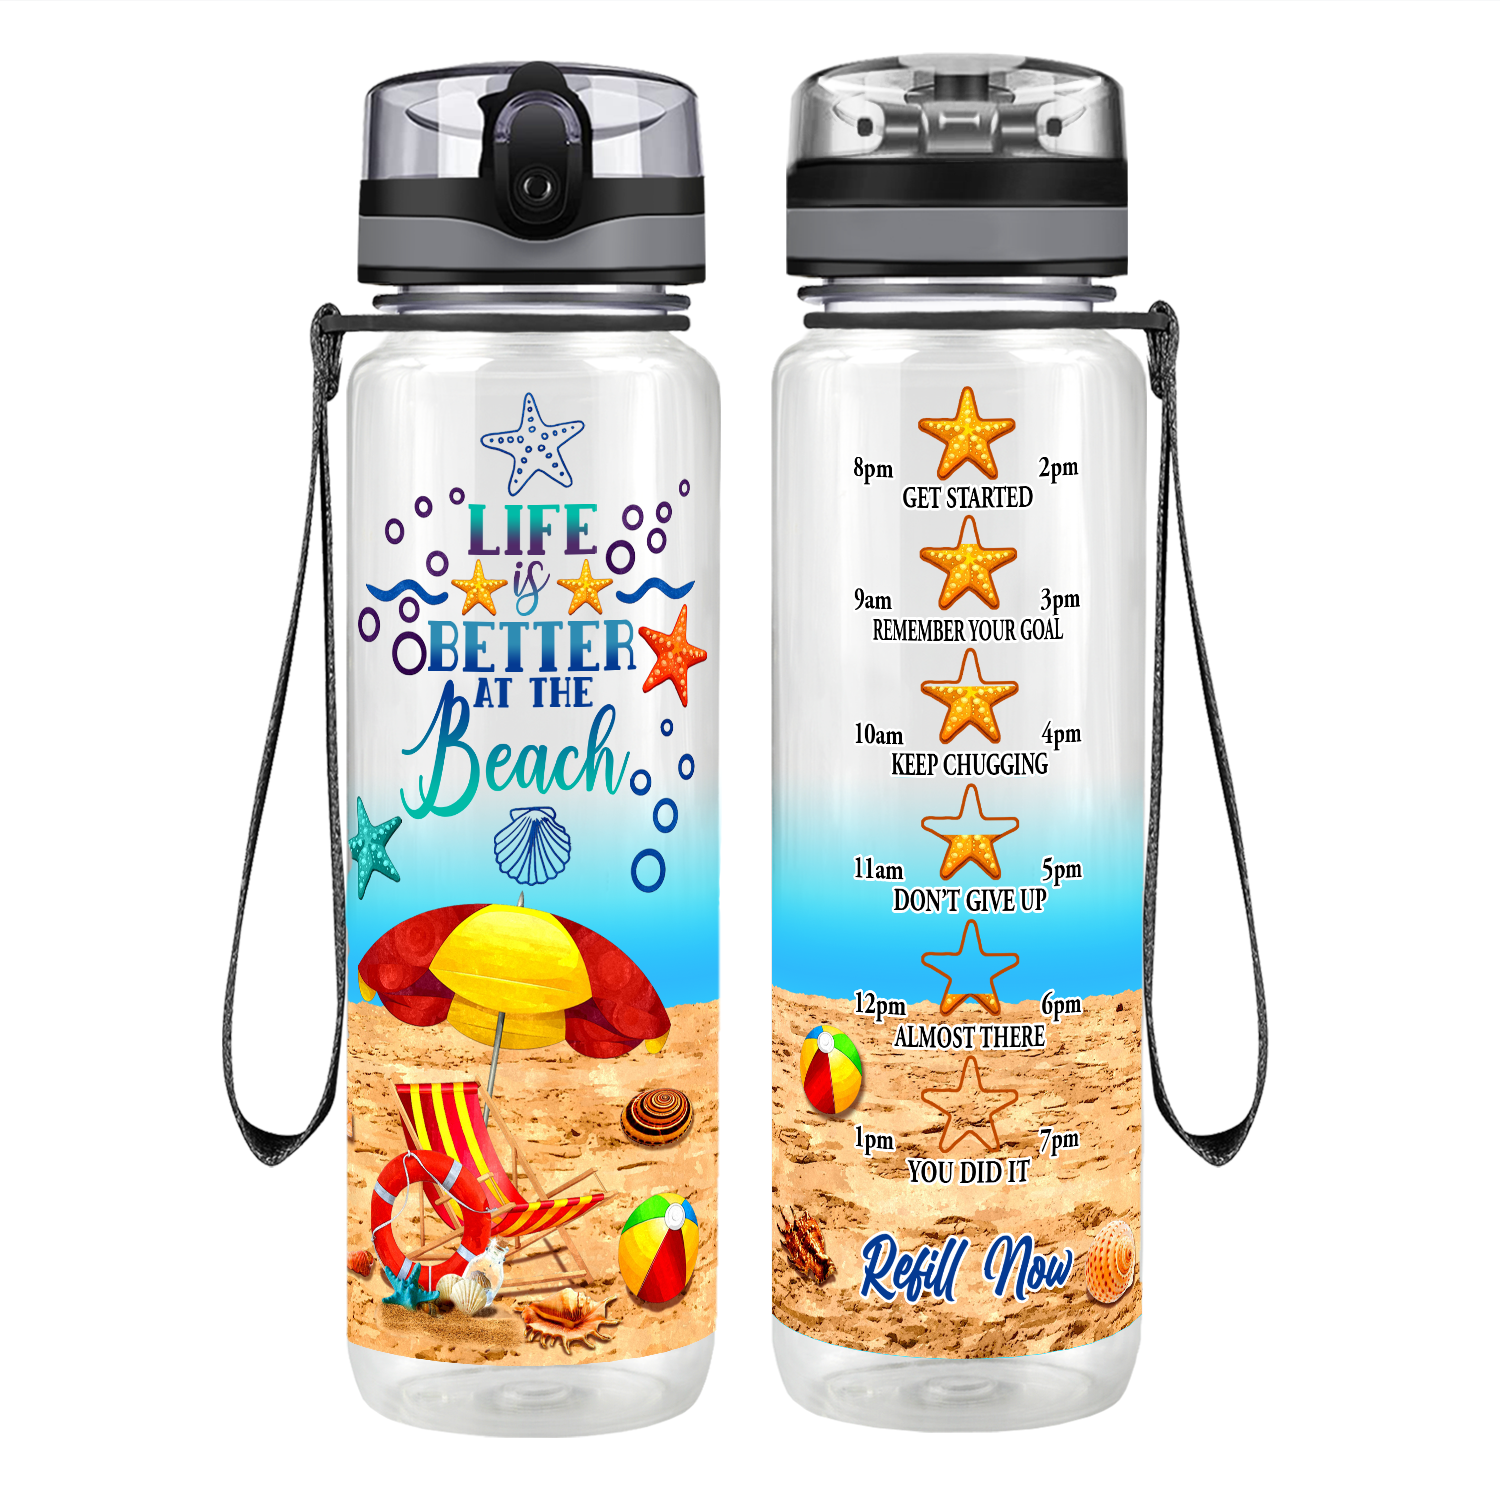 Personalized Life is Better at the Beach Umbrella Motivational Tracking Water Bottle